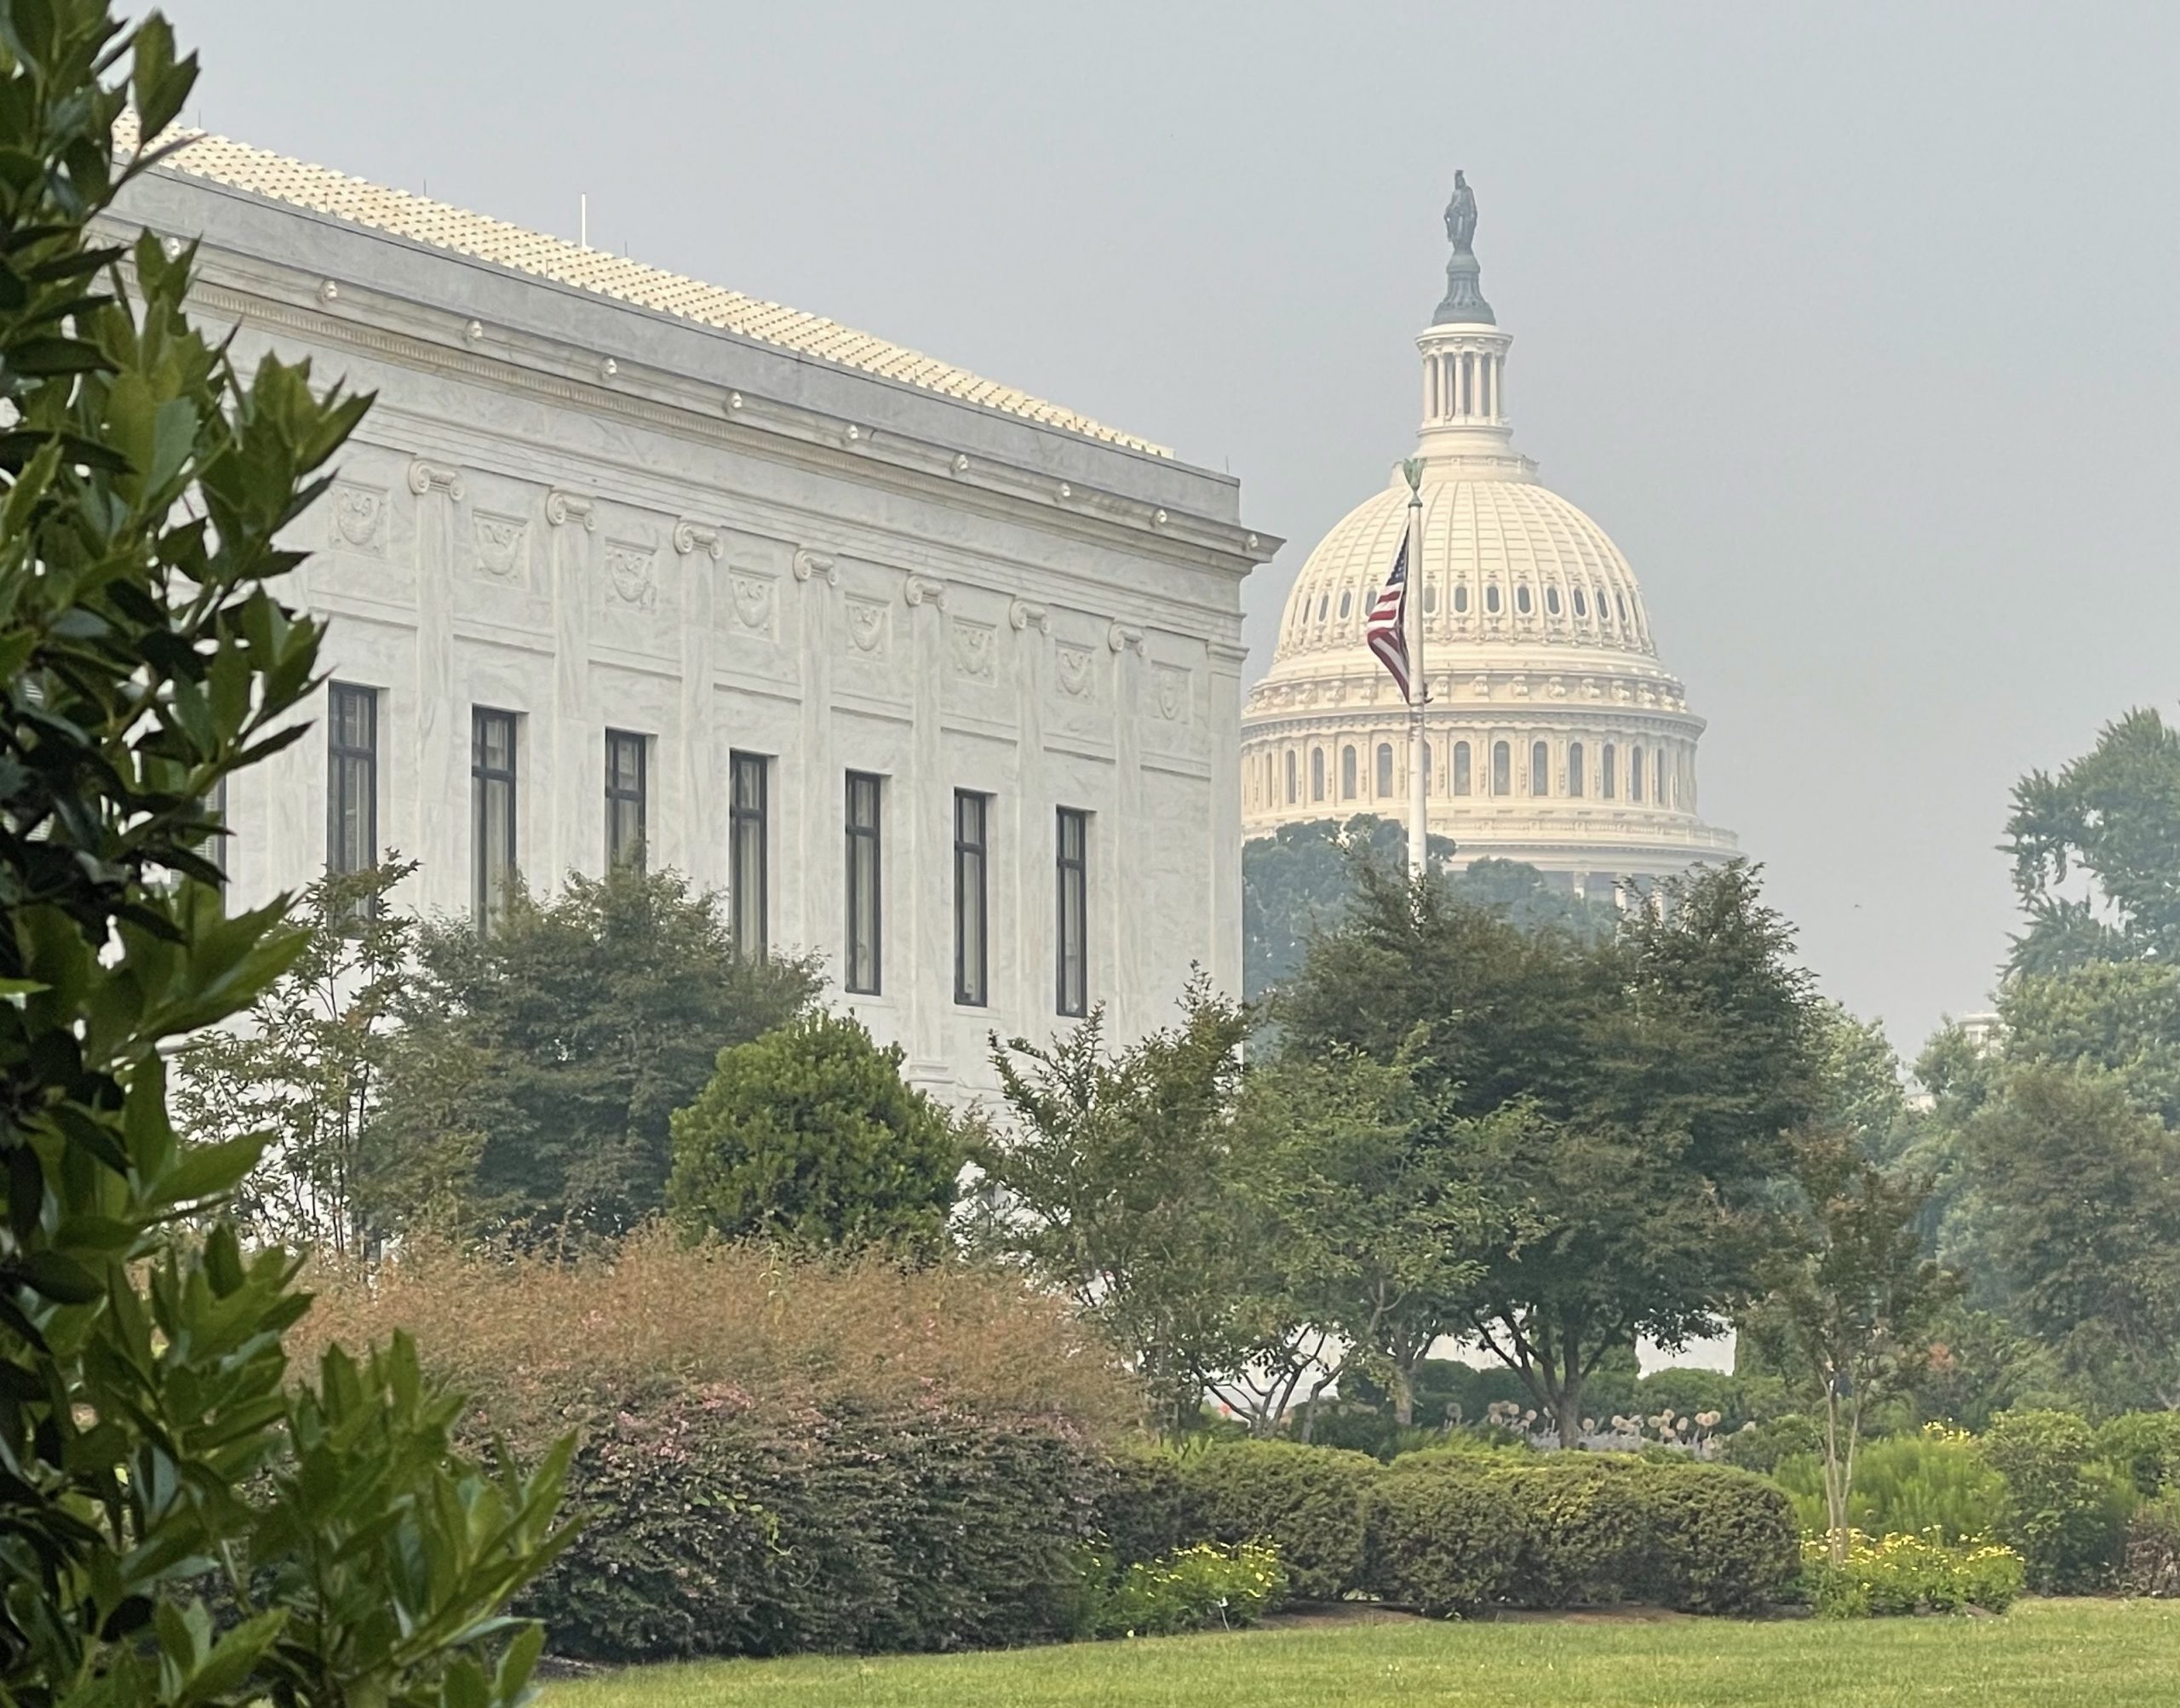 The Supreme Court and Capitol buildings under a haze of wildfire smoke